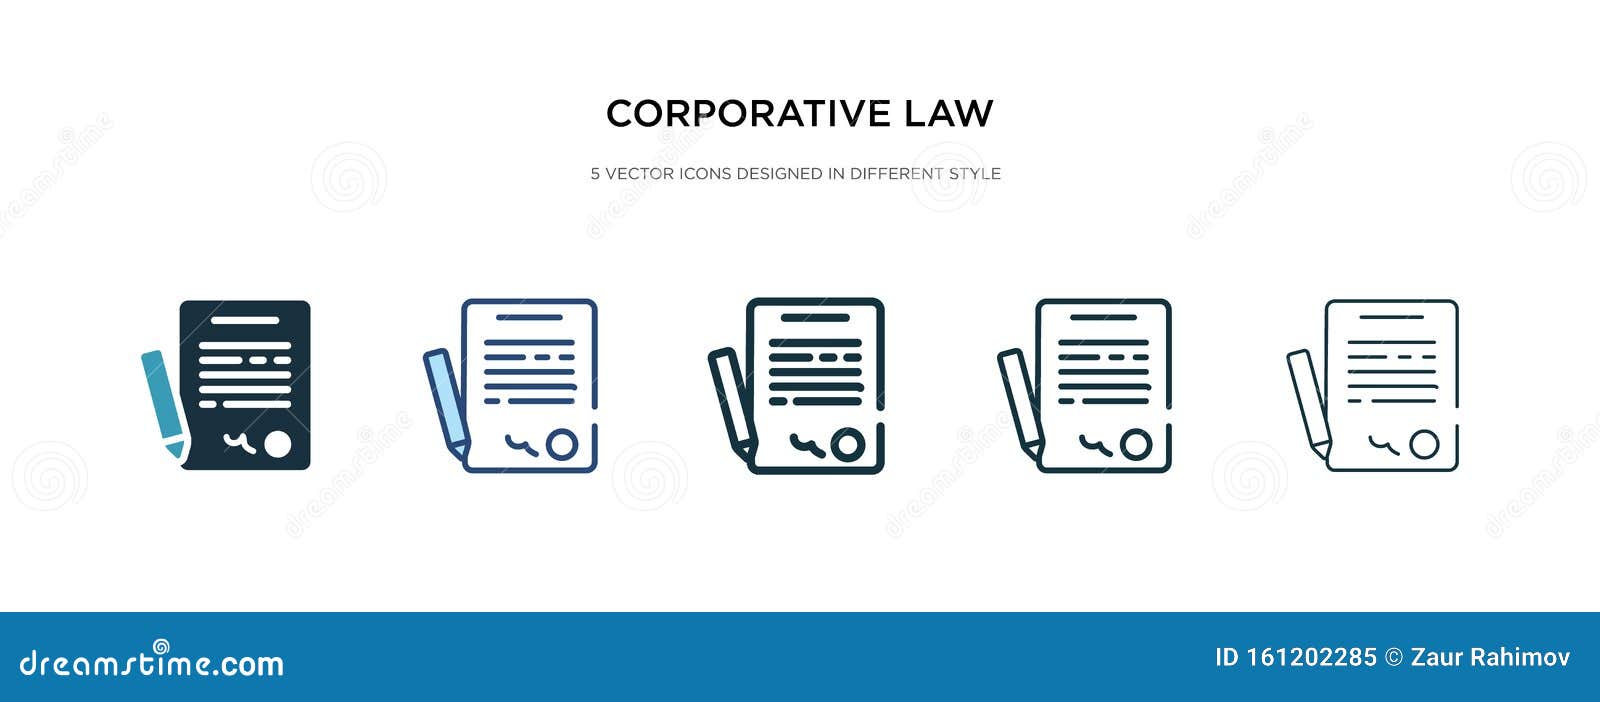 corporative law icon in different style  . two colored and black corporative law  icons ed in filled